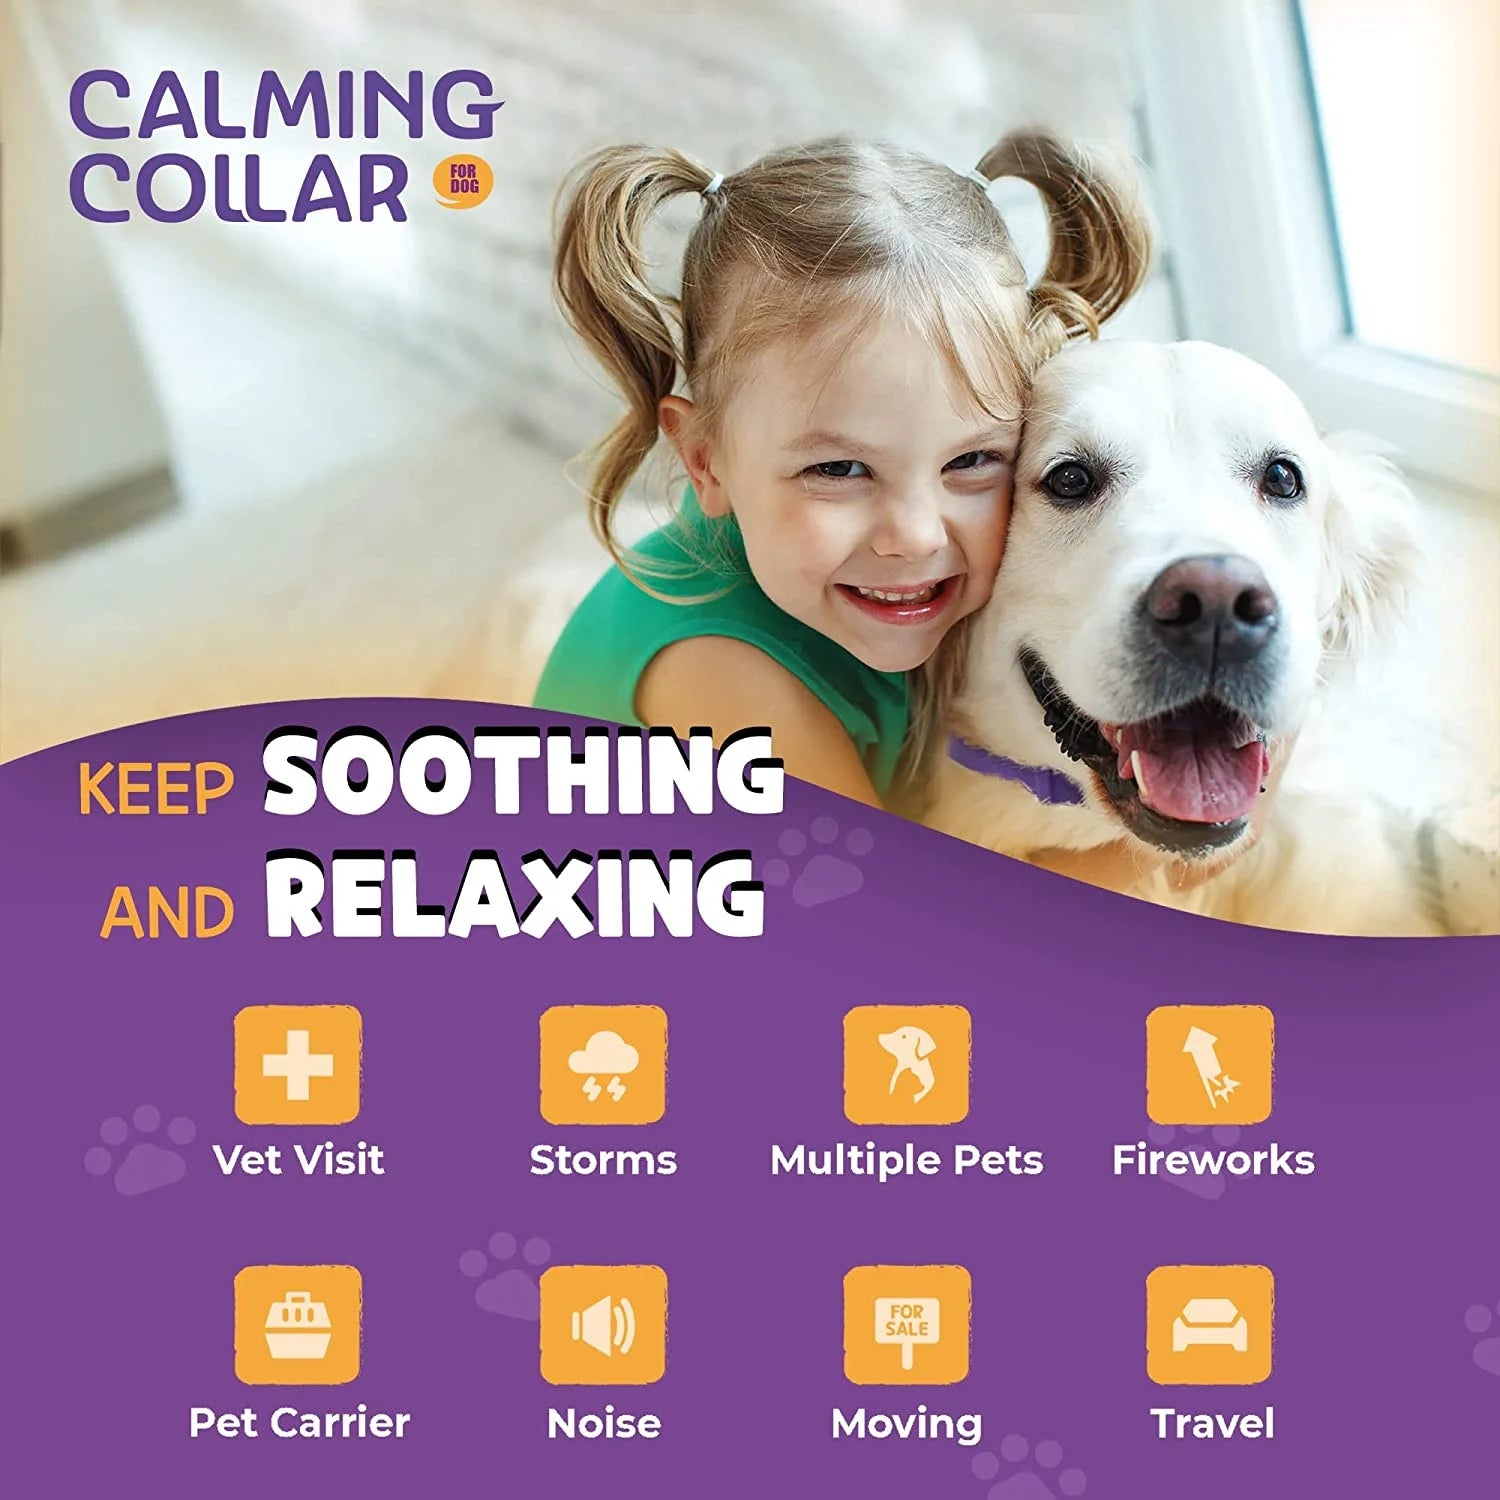 pet calming collar, soothing and relaxing when it comes to the stresses for your pet, vet visits, storms, multiple pets, fireworks, noise, moving, travel, pet carrier